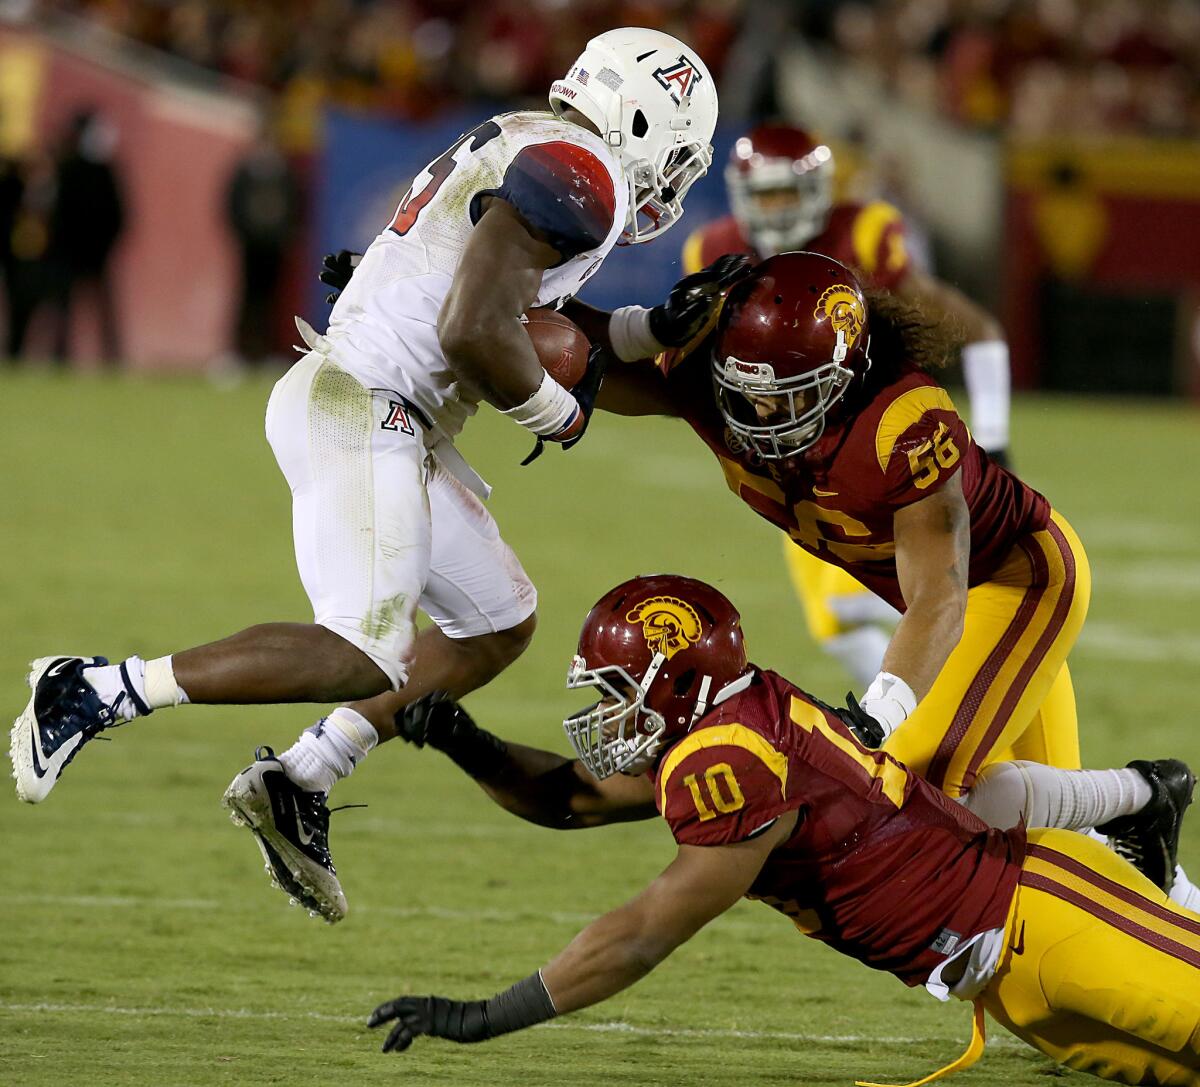 Trojan defenders Anthony Sarao, No. 56, and Hayes Pullard, No. 10, close in on Arizona running back Ka'Deem Carey during a game on Oct. 10, 2013.